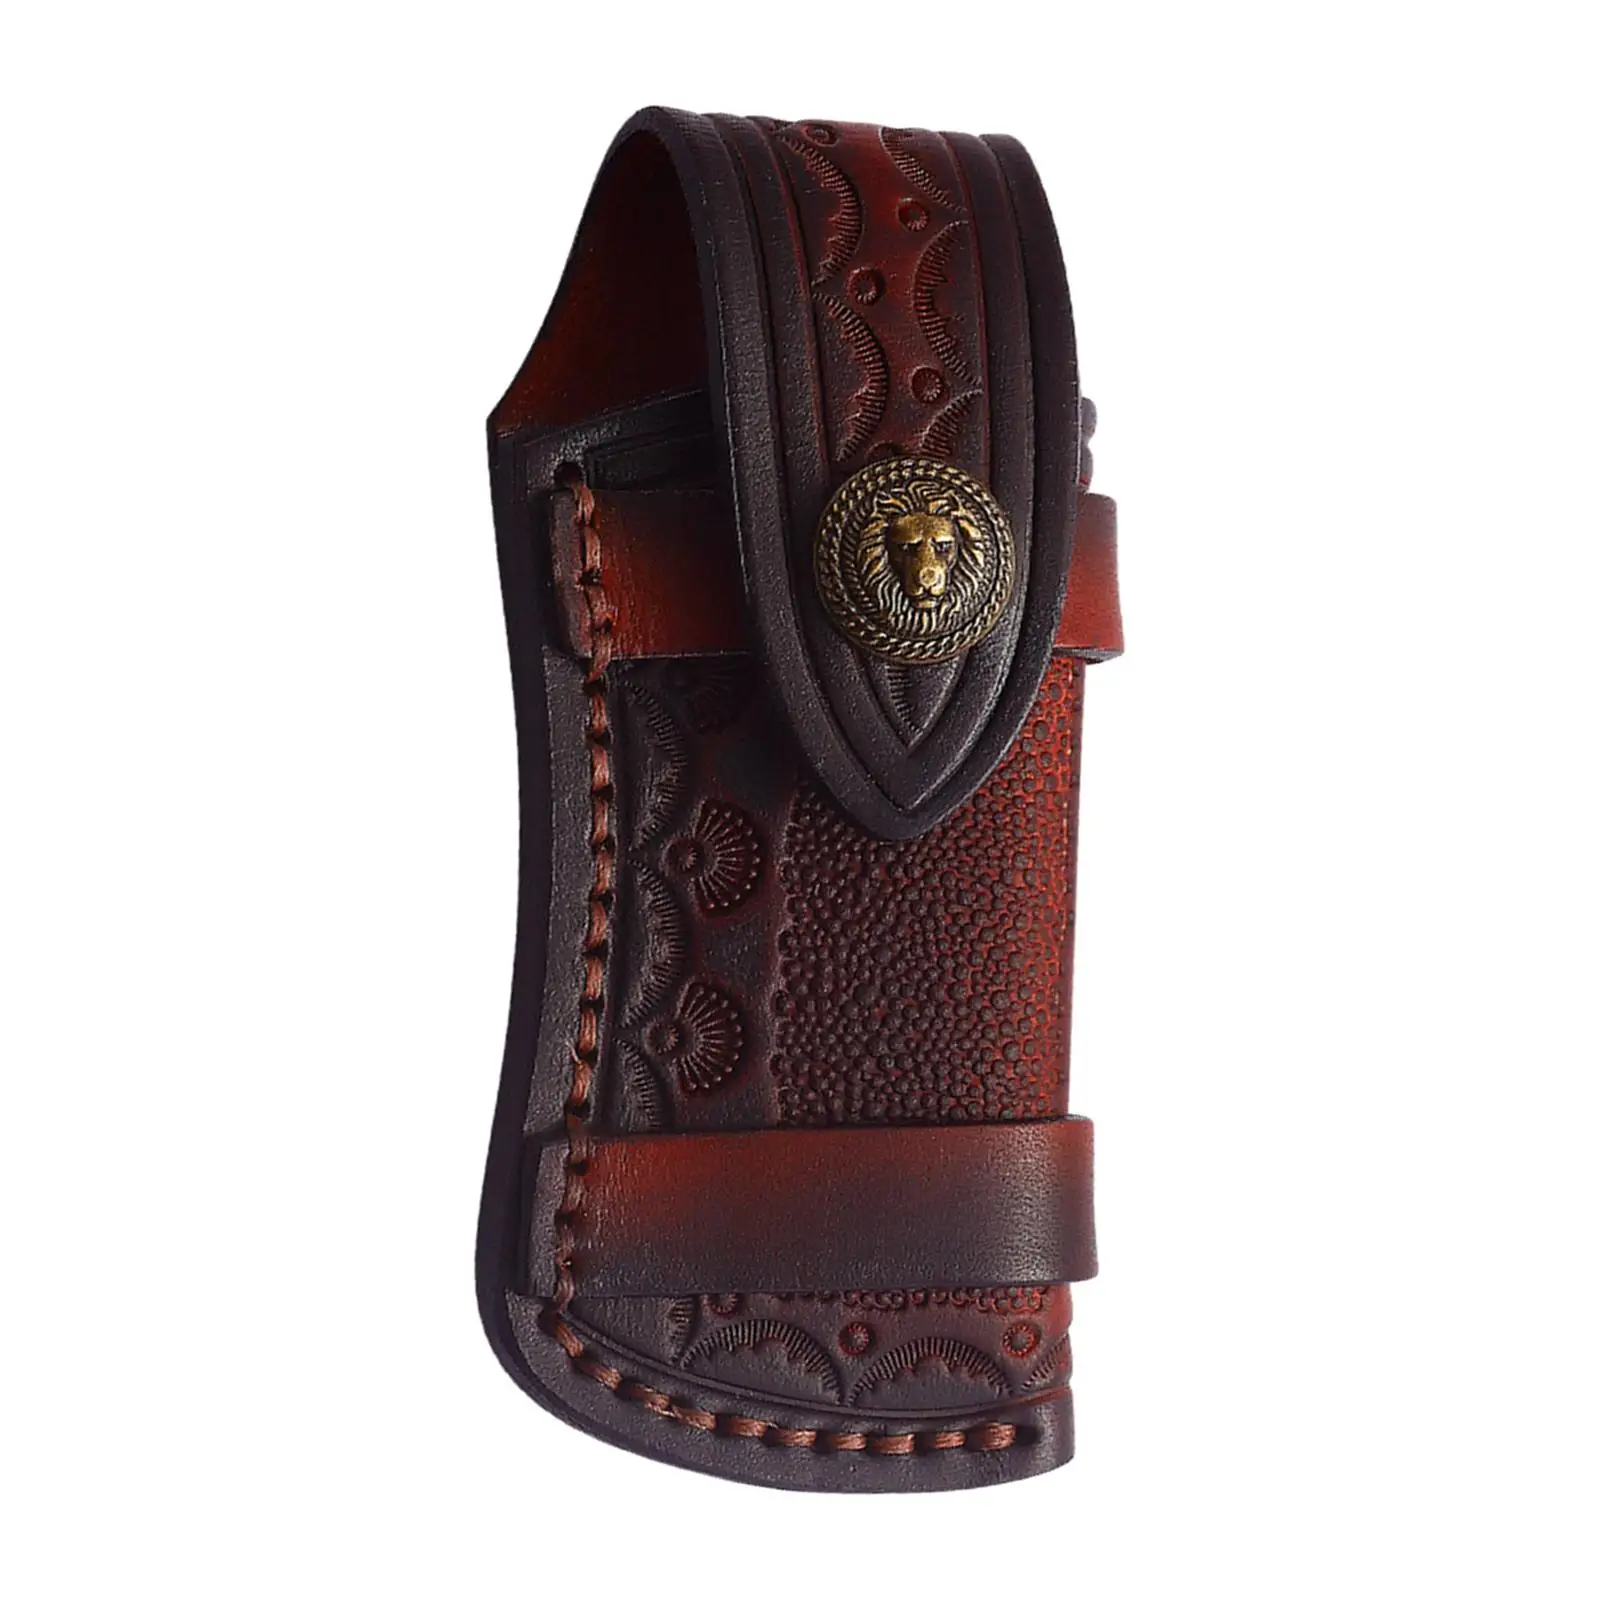 

Leather Sheath for Folding Knife with Snap Closure Knife Cover Easy to Carry